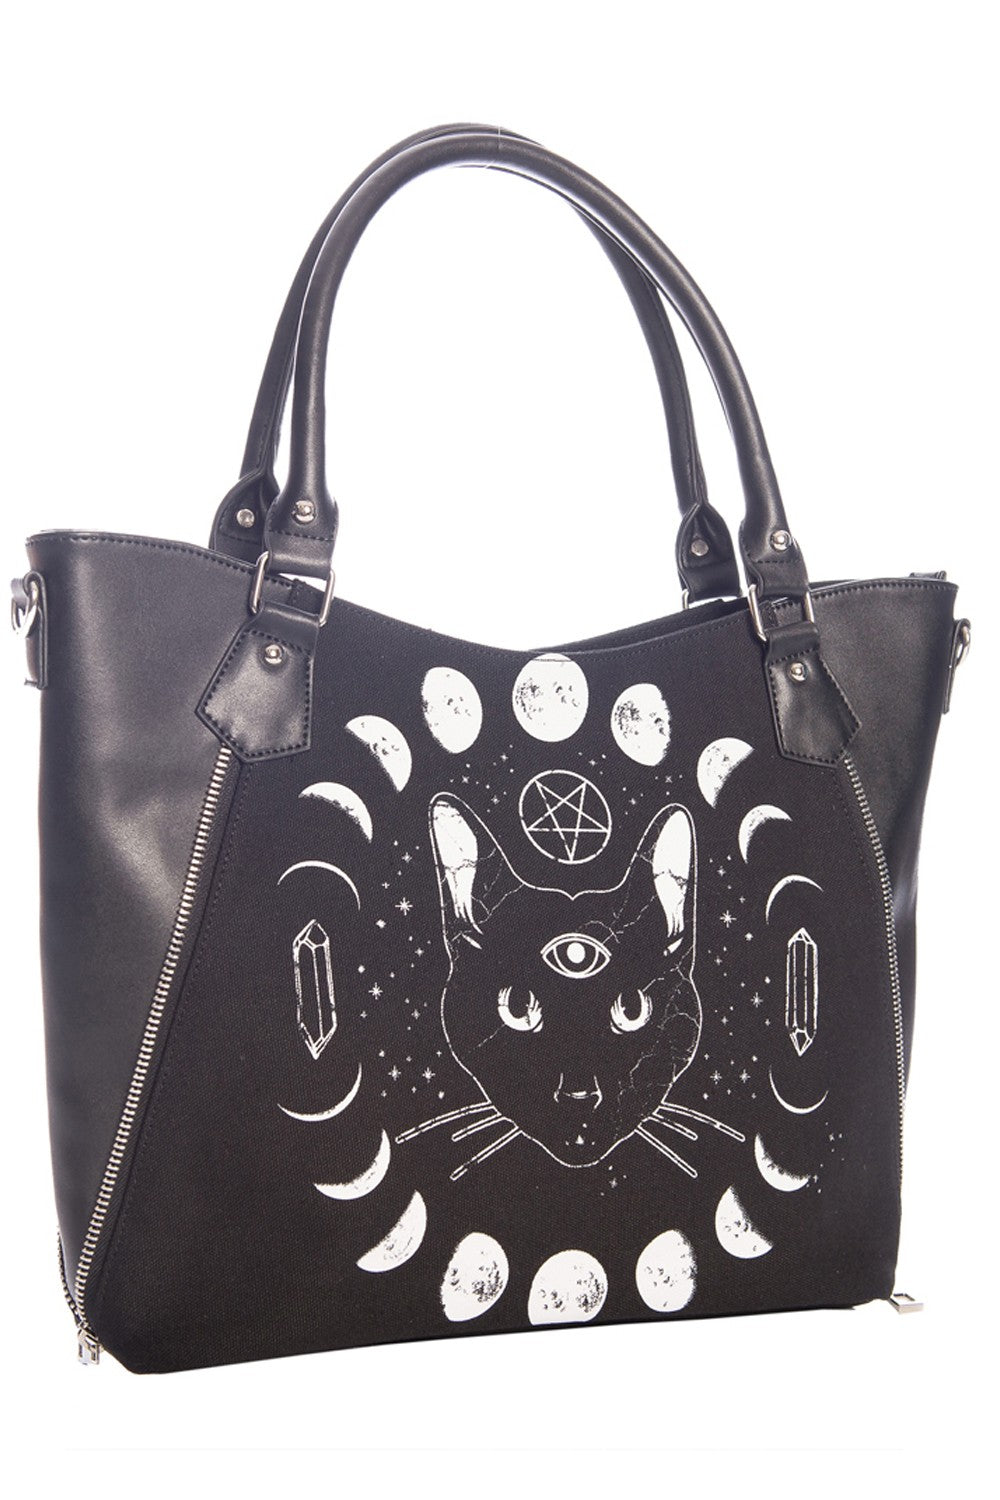 Banned Pentacle Coven Moon Phases Cat Bag